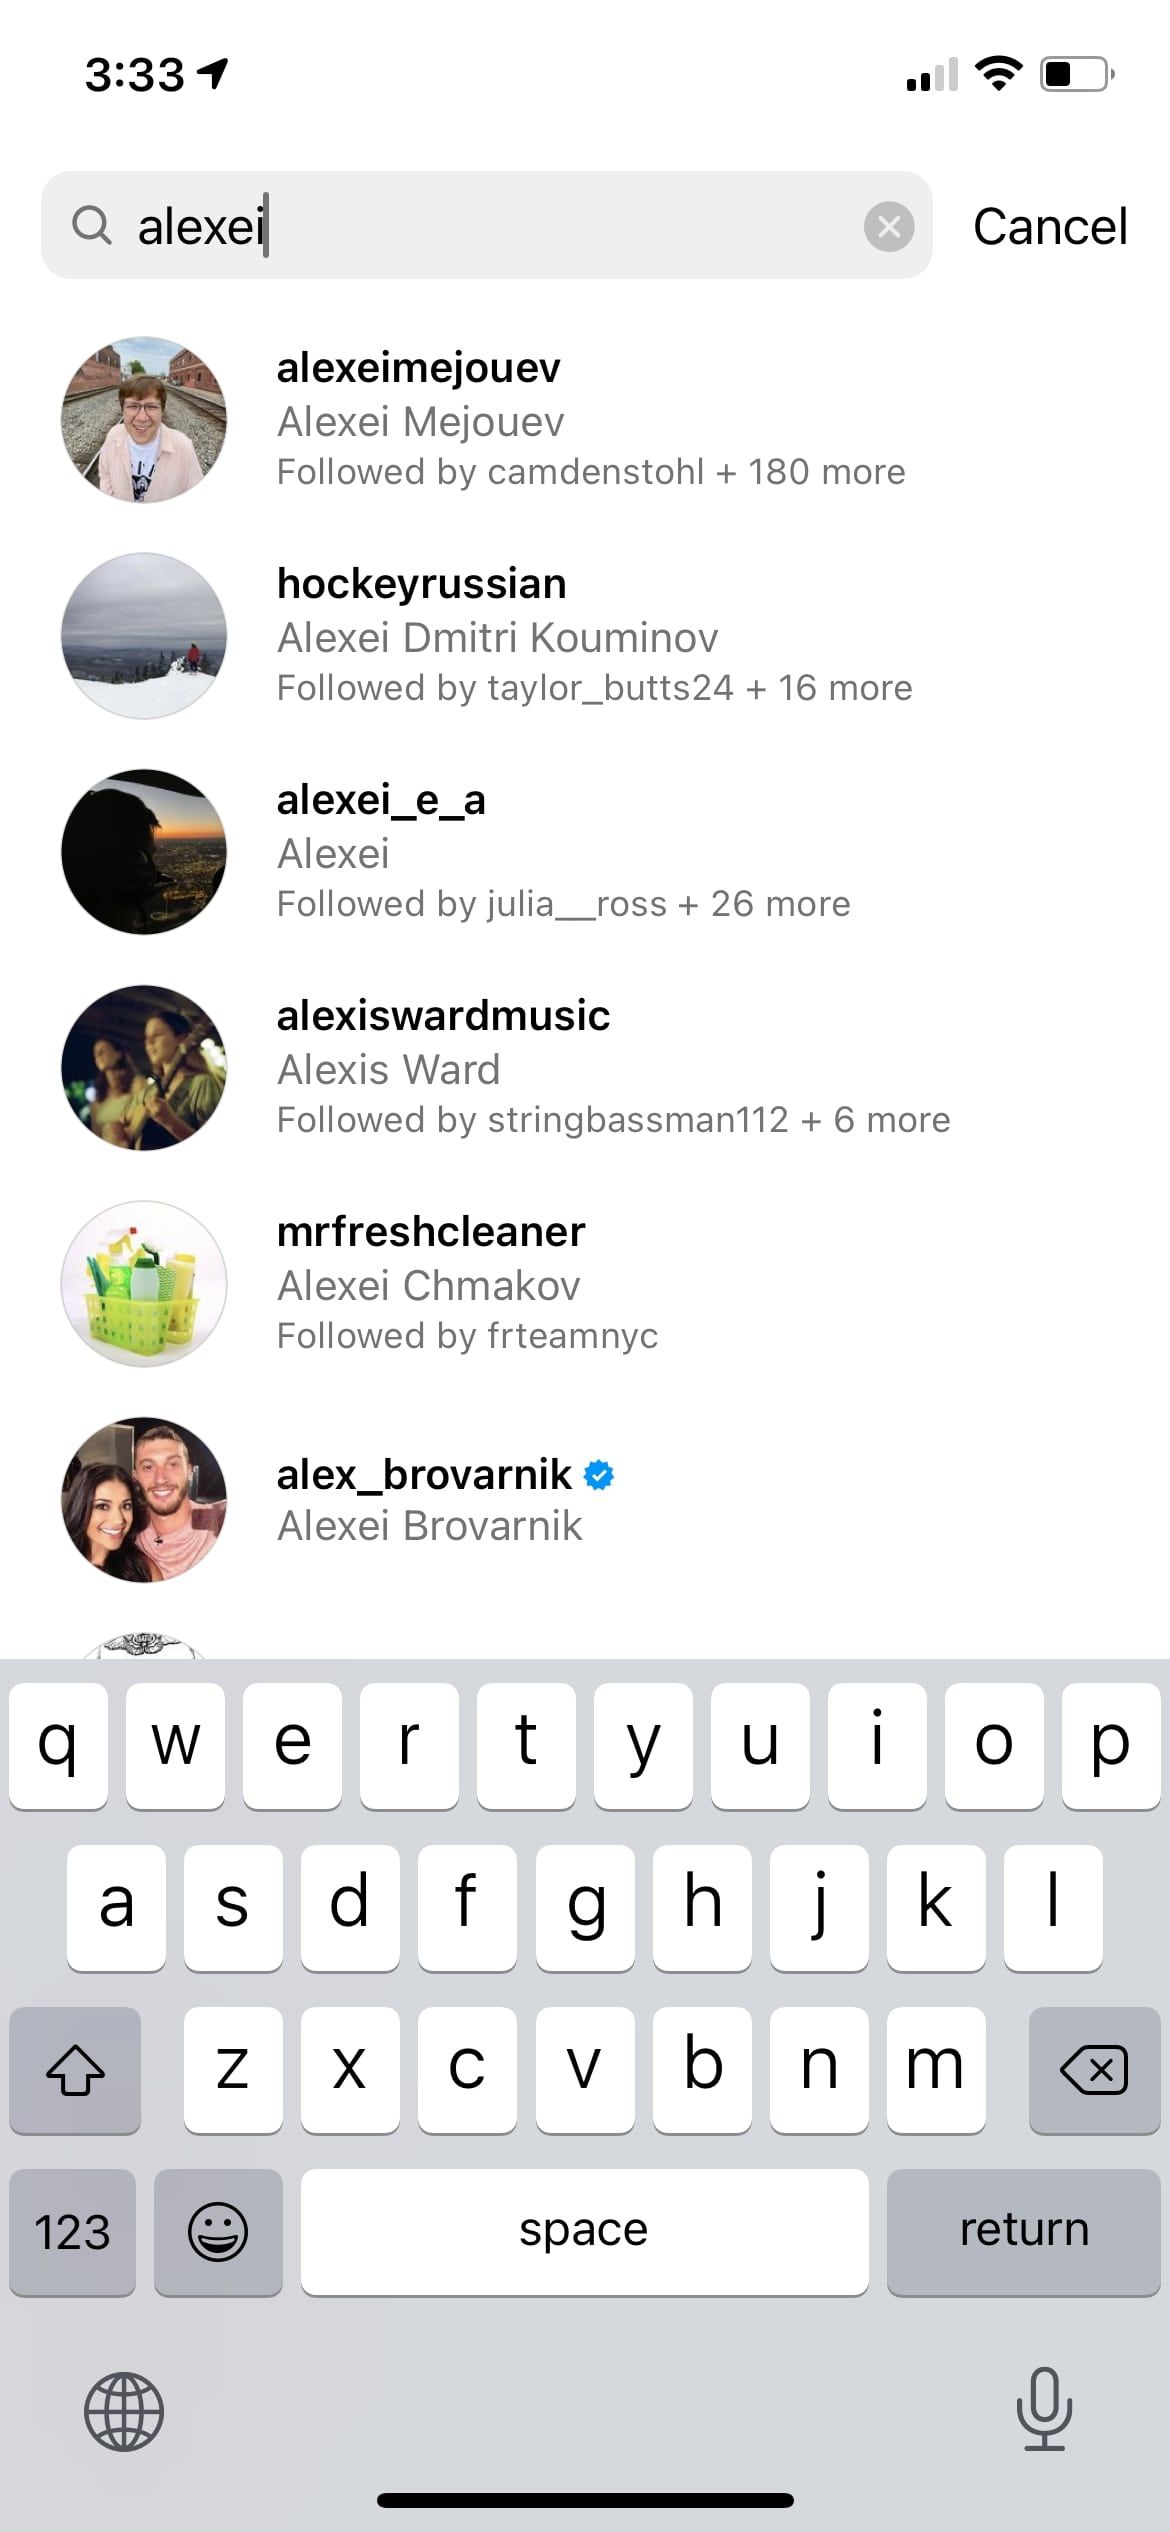 Screenshot of searching for a collaborator's account on Instagram